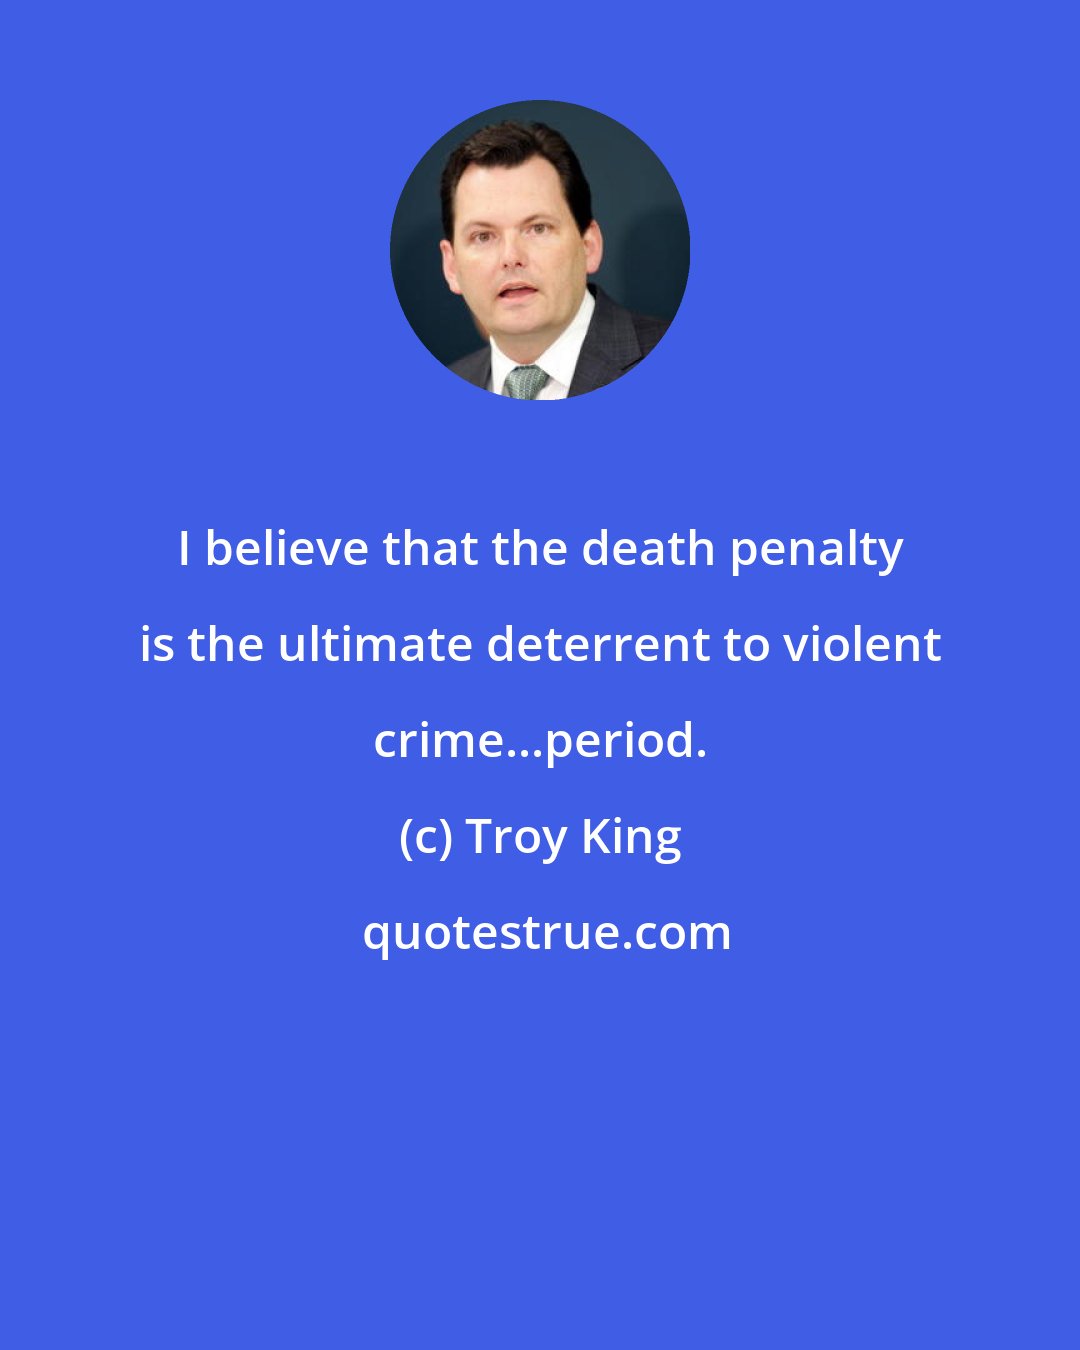 Troy King: I believe that the death penalty is the ultimate deterrent to violent crime...period.